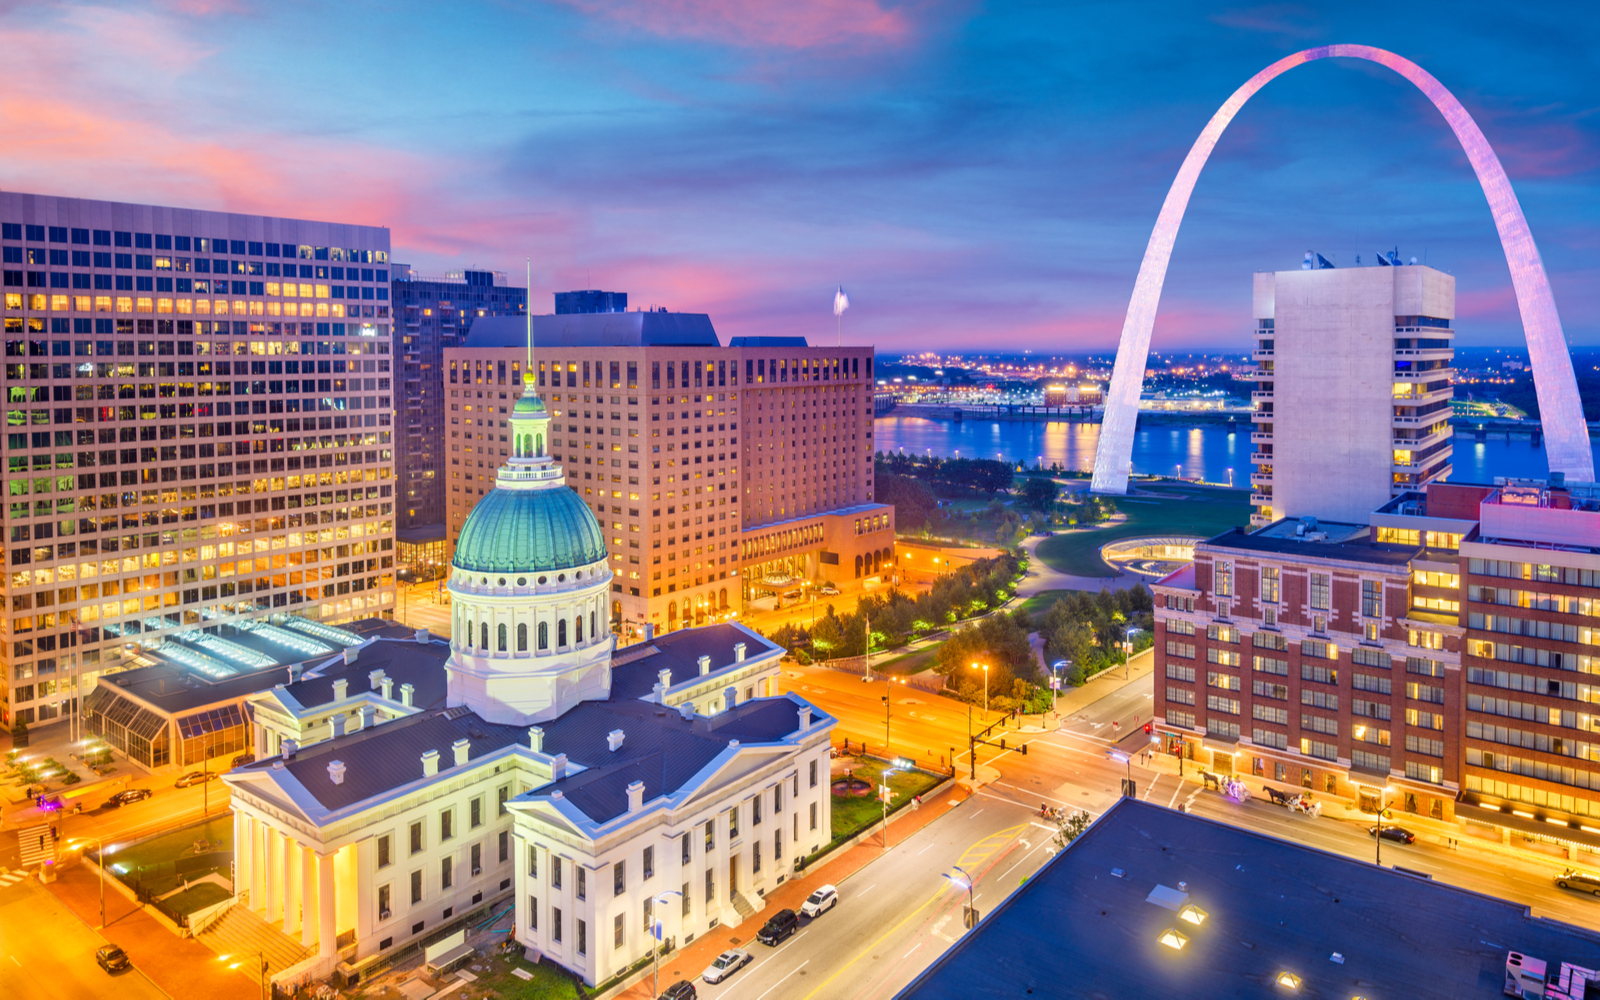 Cool featured image of some of the best things to do in St. Louis, the Arch and downtown pictured at night